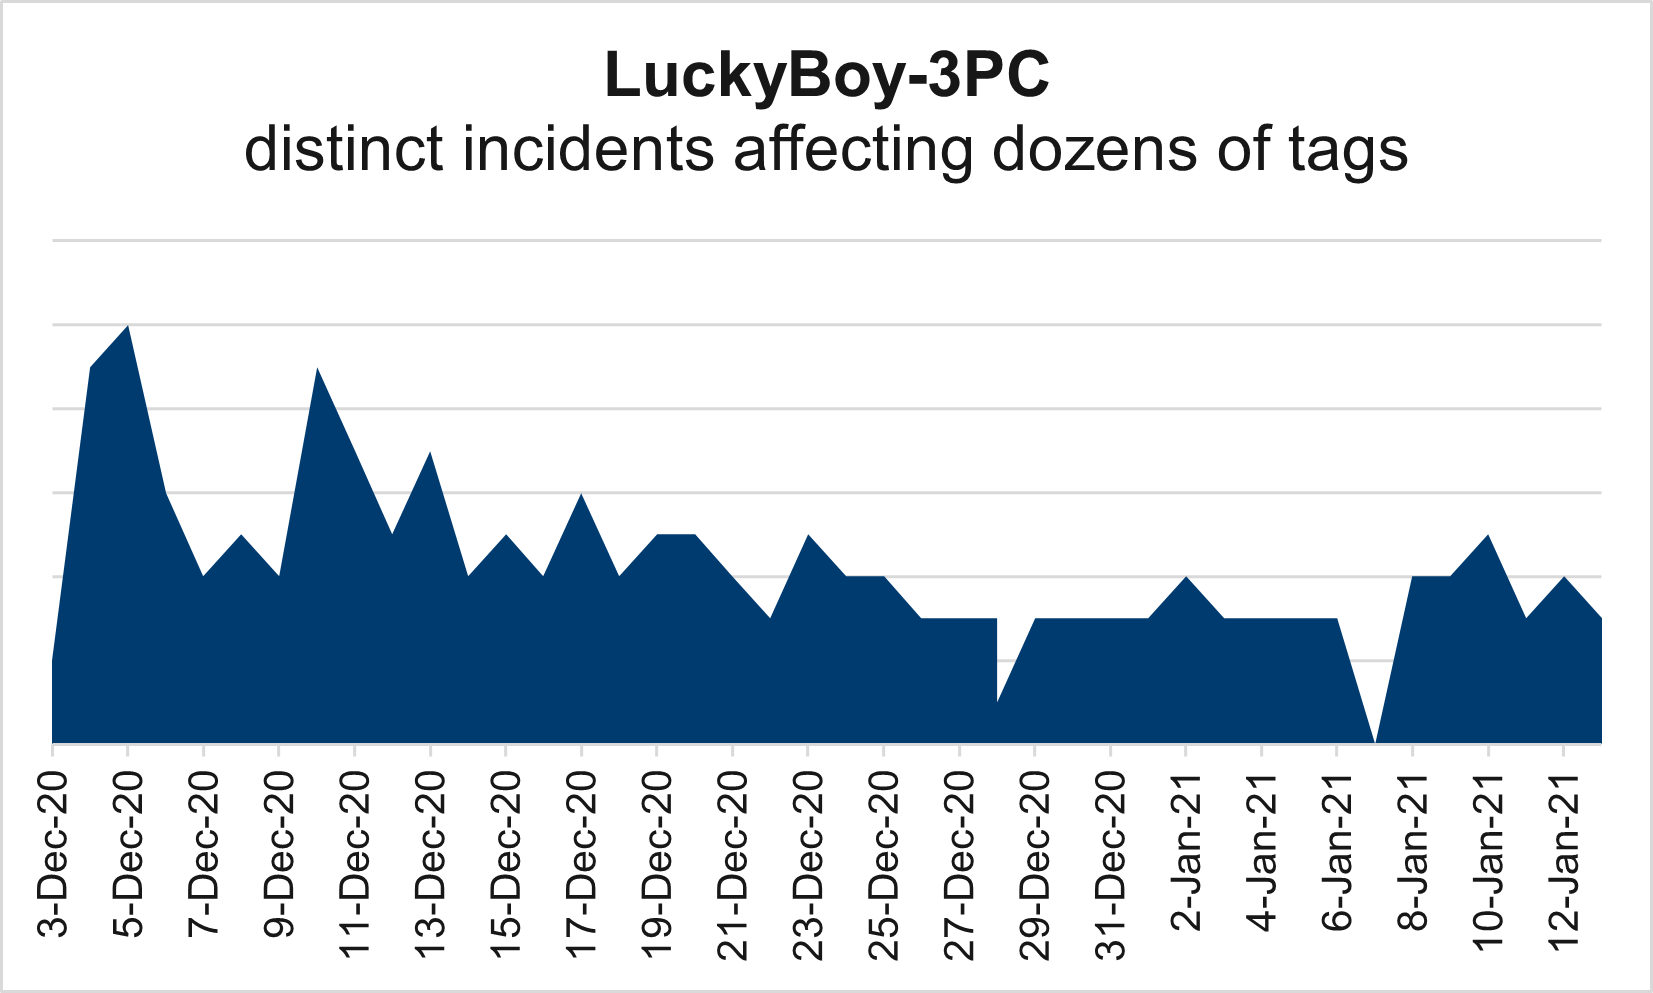 LuckyBoy-3PC incident volume affecting dozens of tags across 10 DSPs